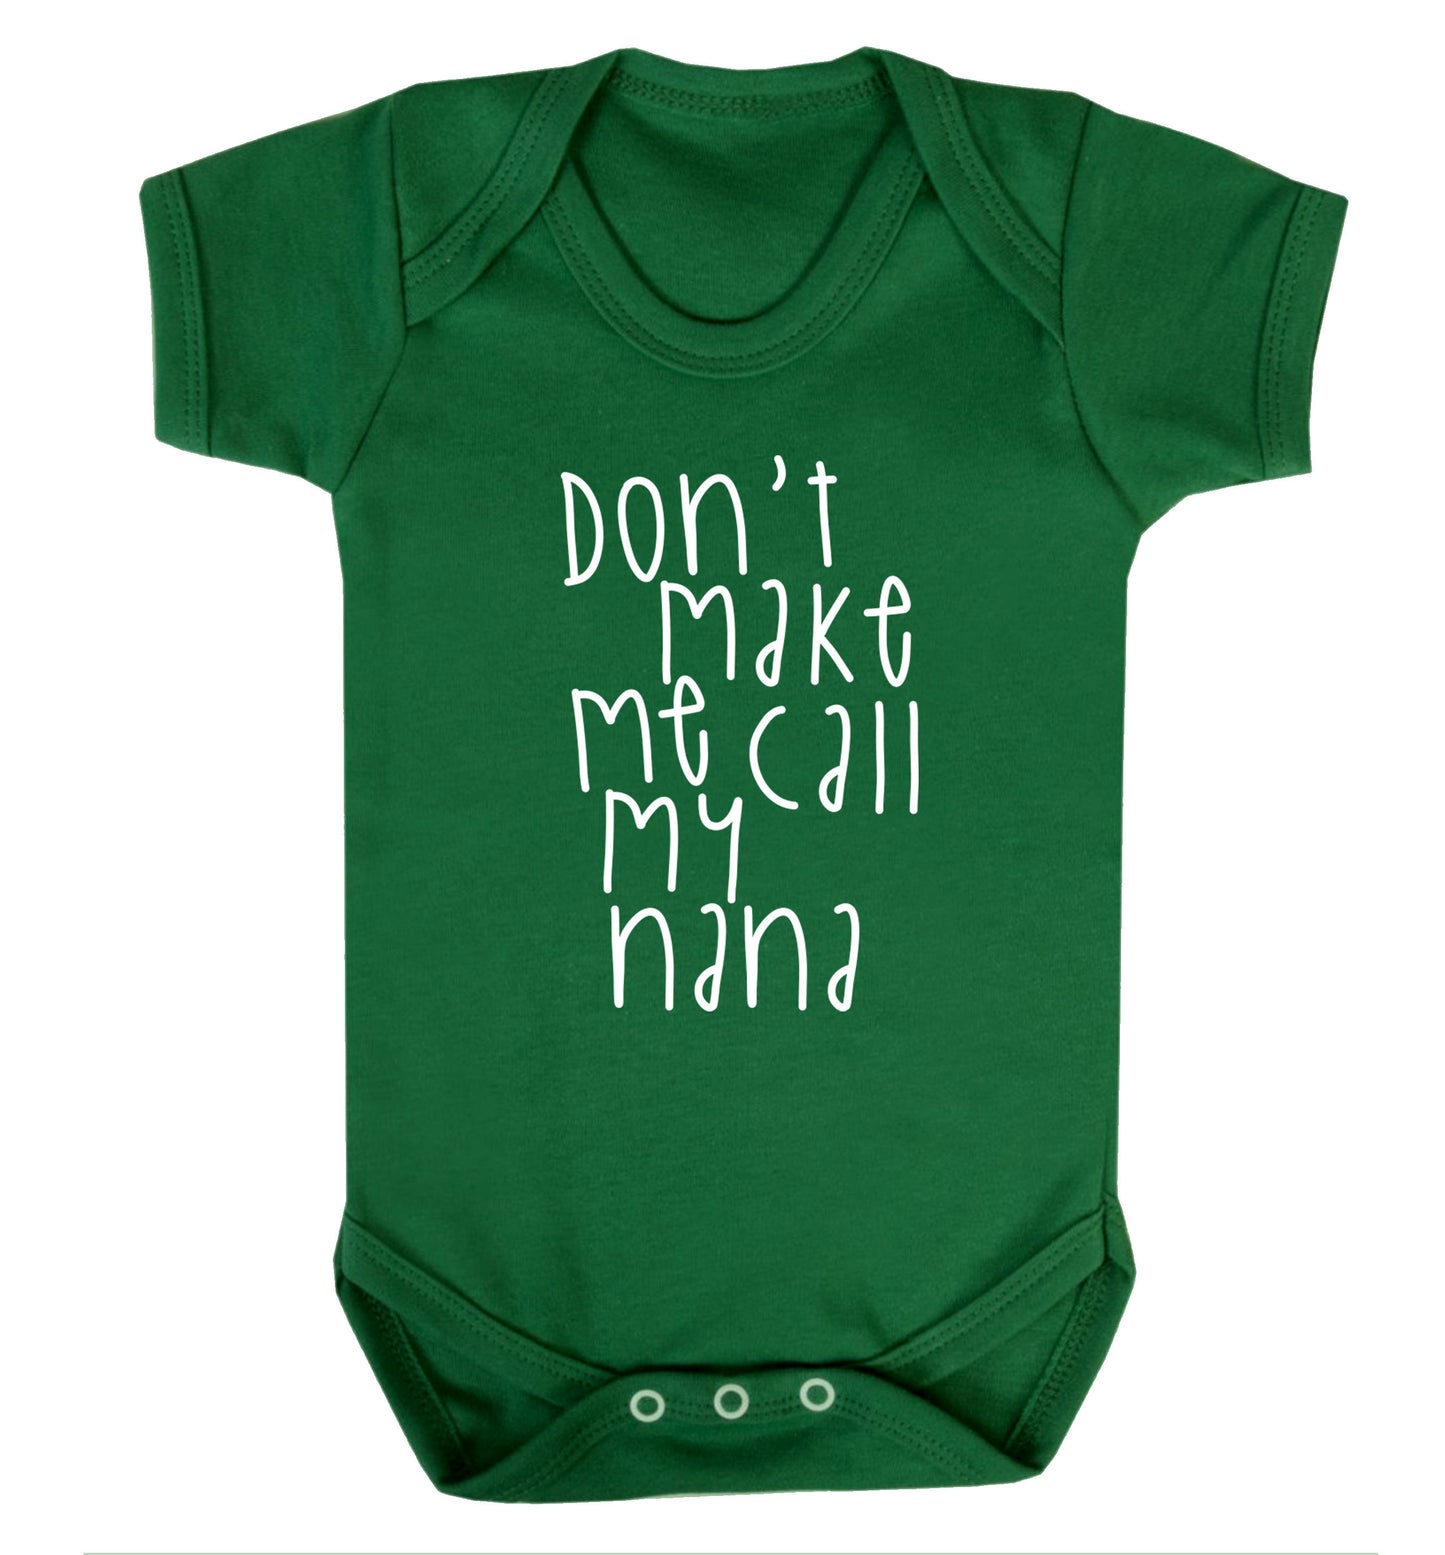 Don't make me call my nana Baby Vest green 18-24 months